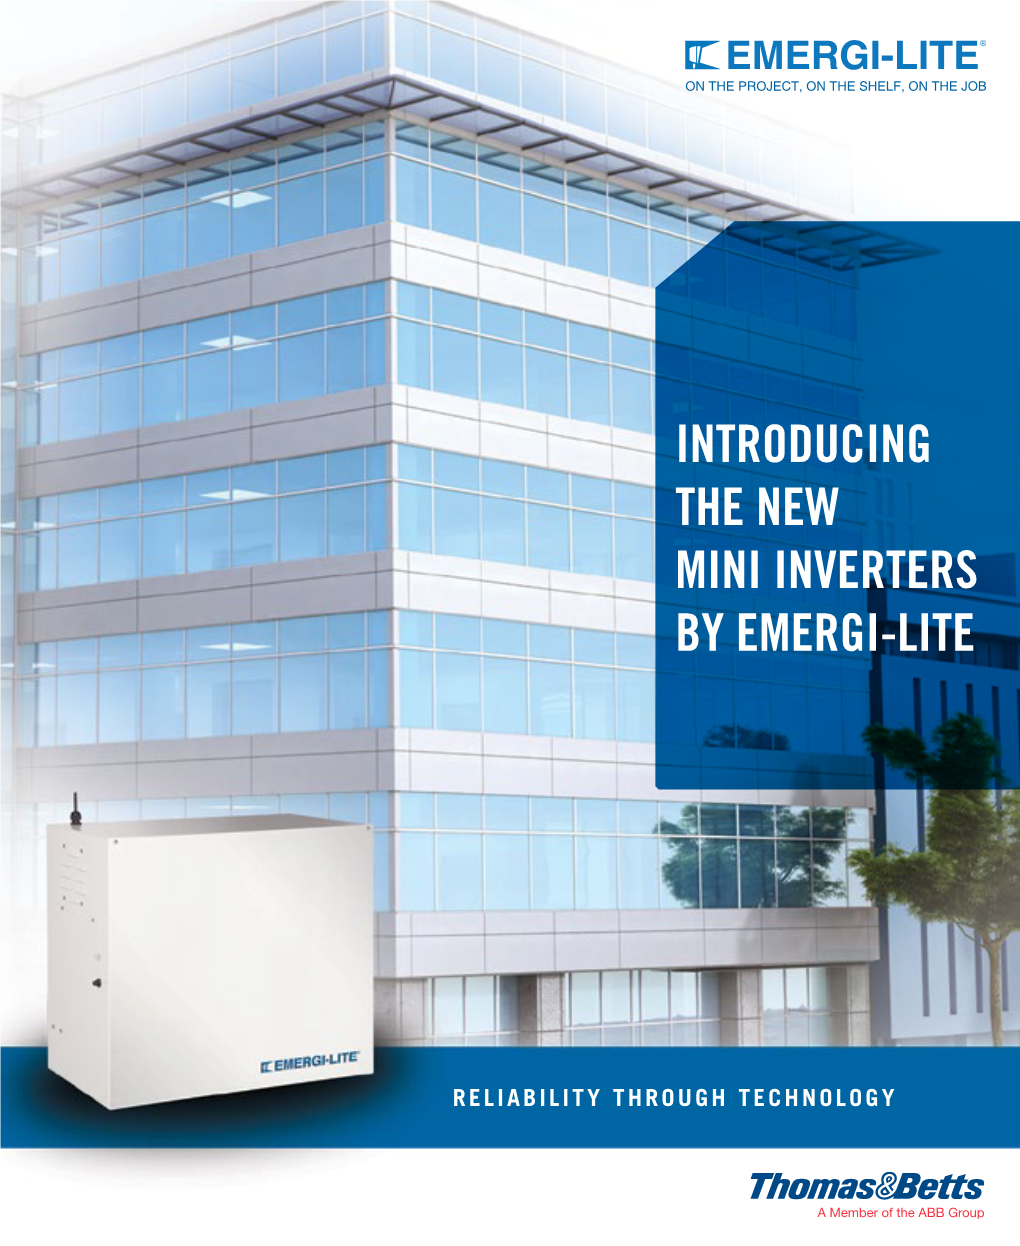 Introducing the New Mini Inverters by Emergi-Lite